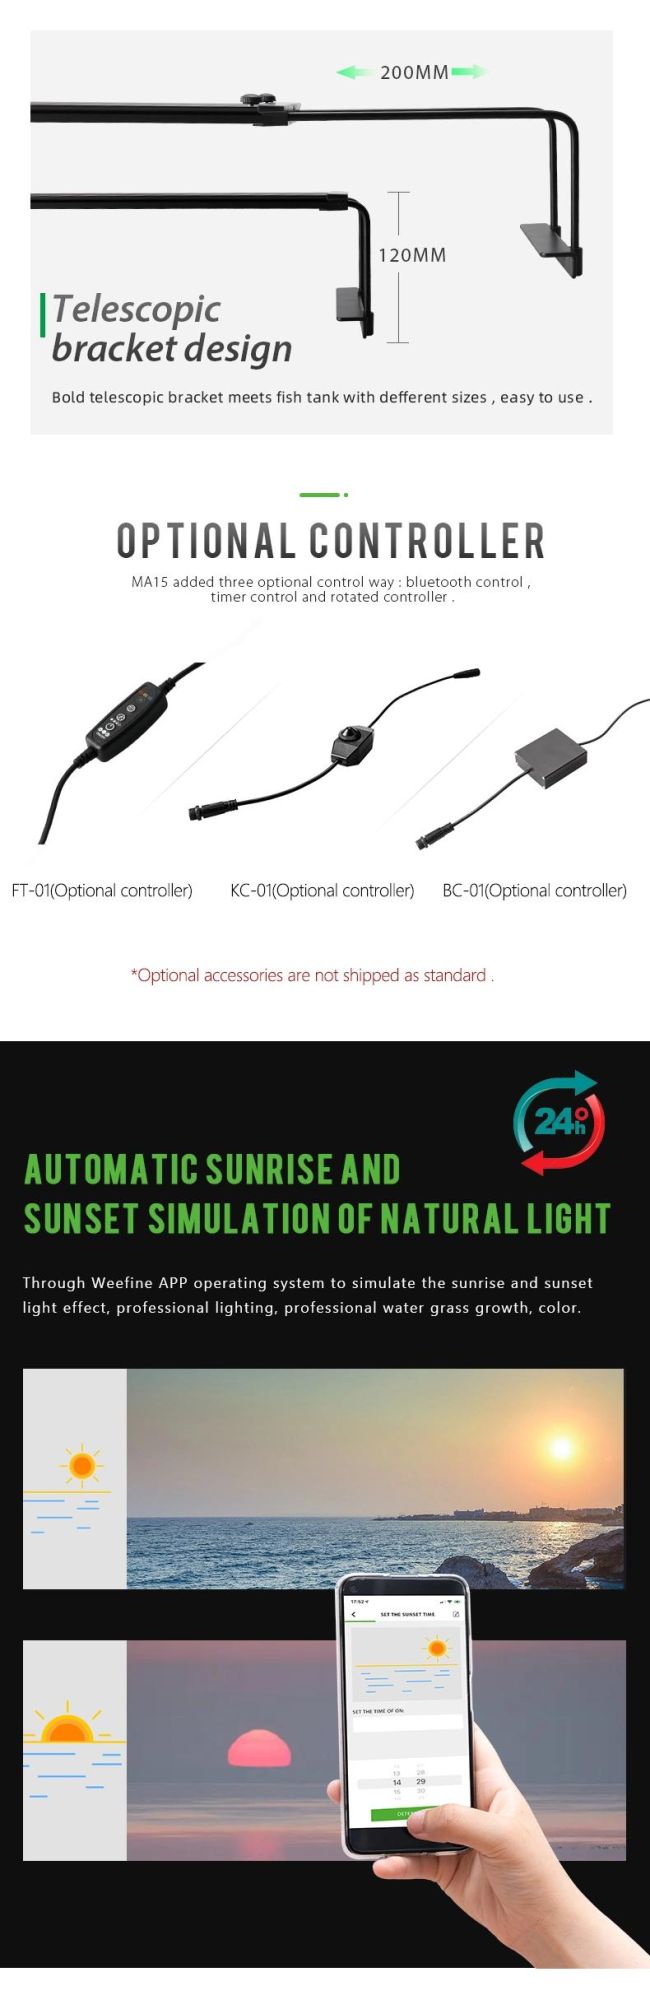 105W Programmable LED Aquarium Light for Coral Reef with Sunset and Sunrise Mode (MA15)